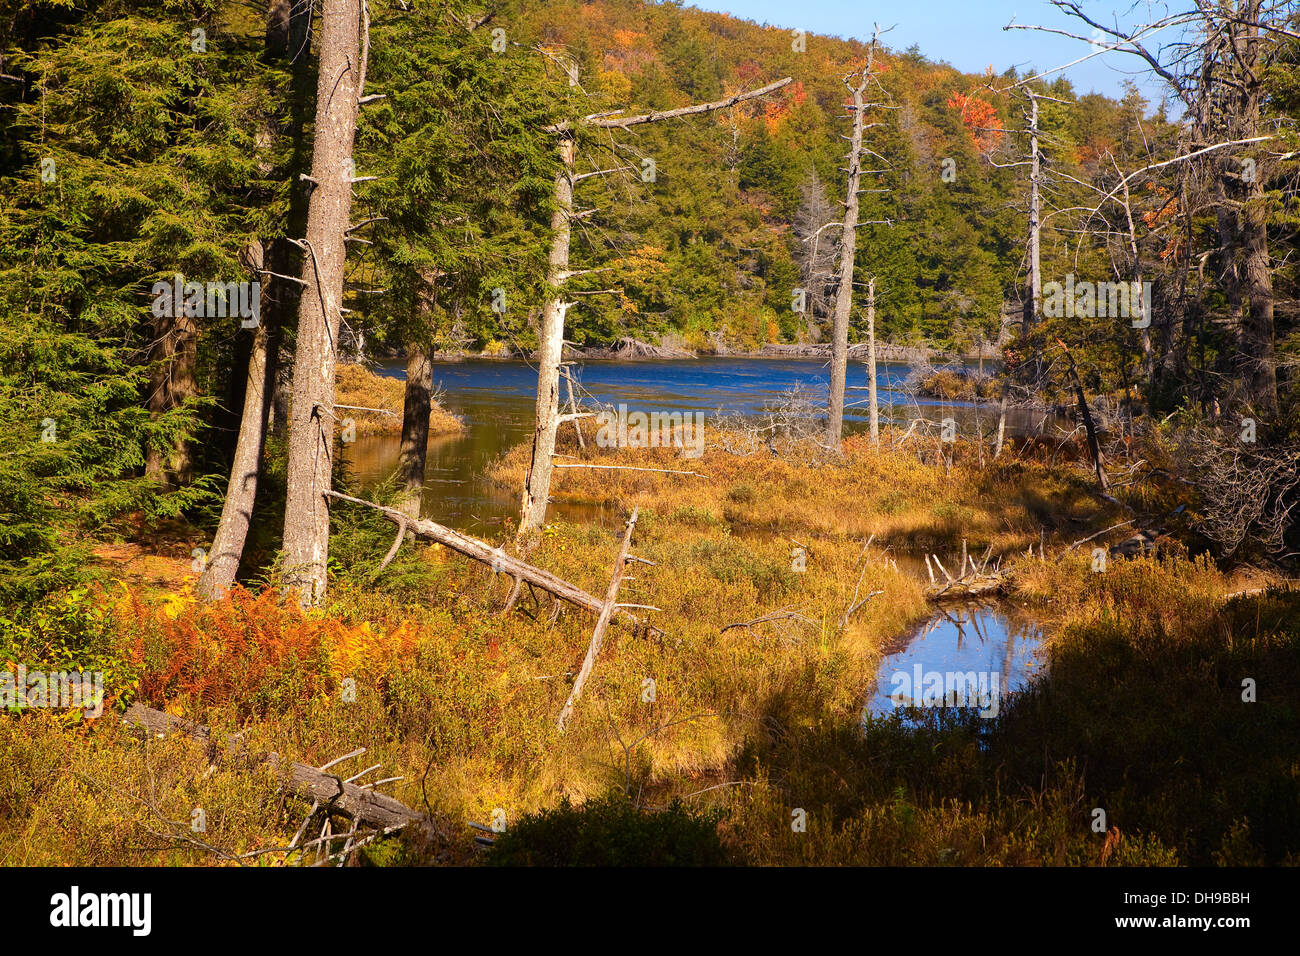 A lake is pictured in front of a colorful fall landscape in Berkshire county' Mount Everett State Reservation, Massachusetts Stock Photo